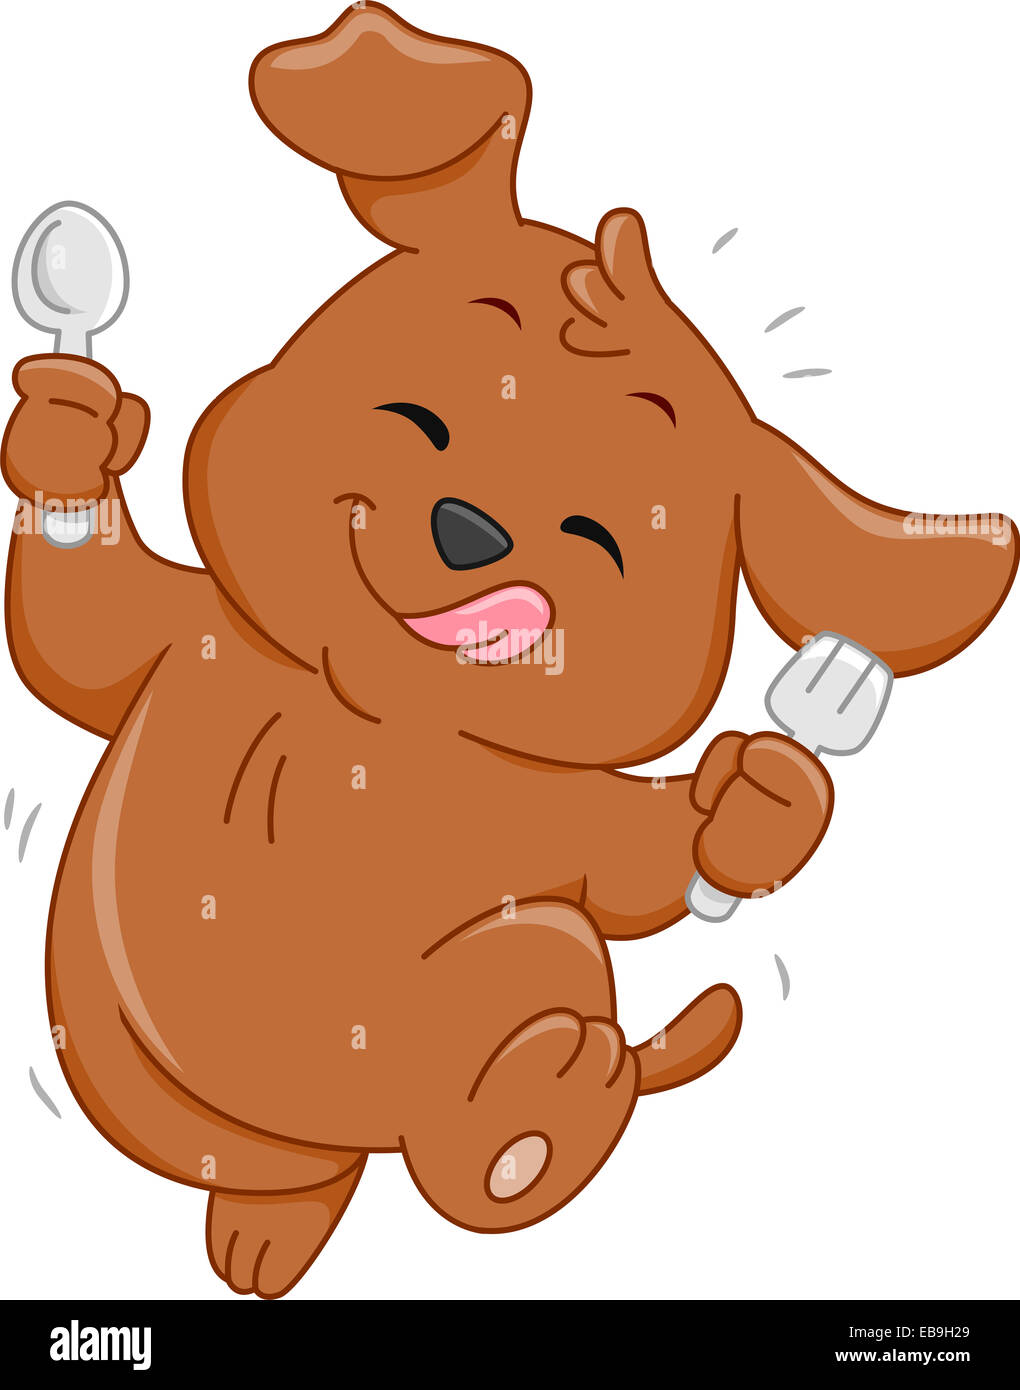 Mascot Illustration Featuring a Hungry Dog Holding a Spoon and Fork Stock Photo